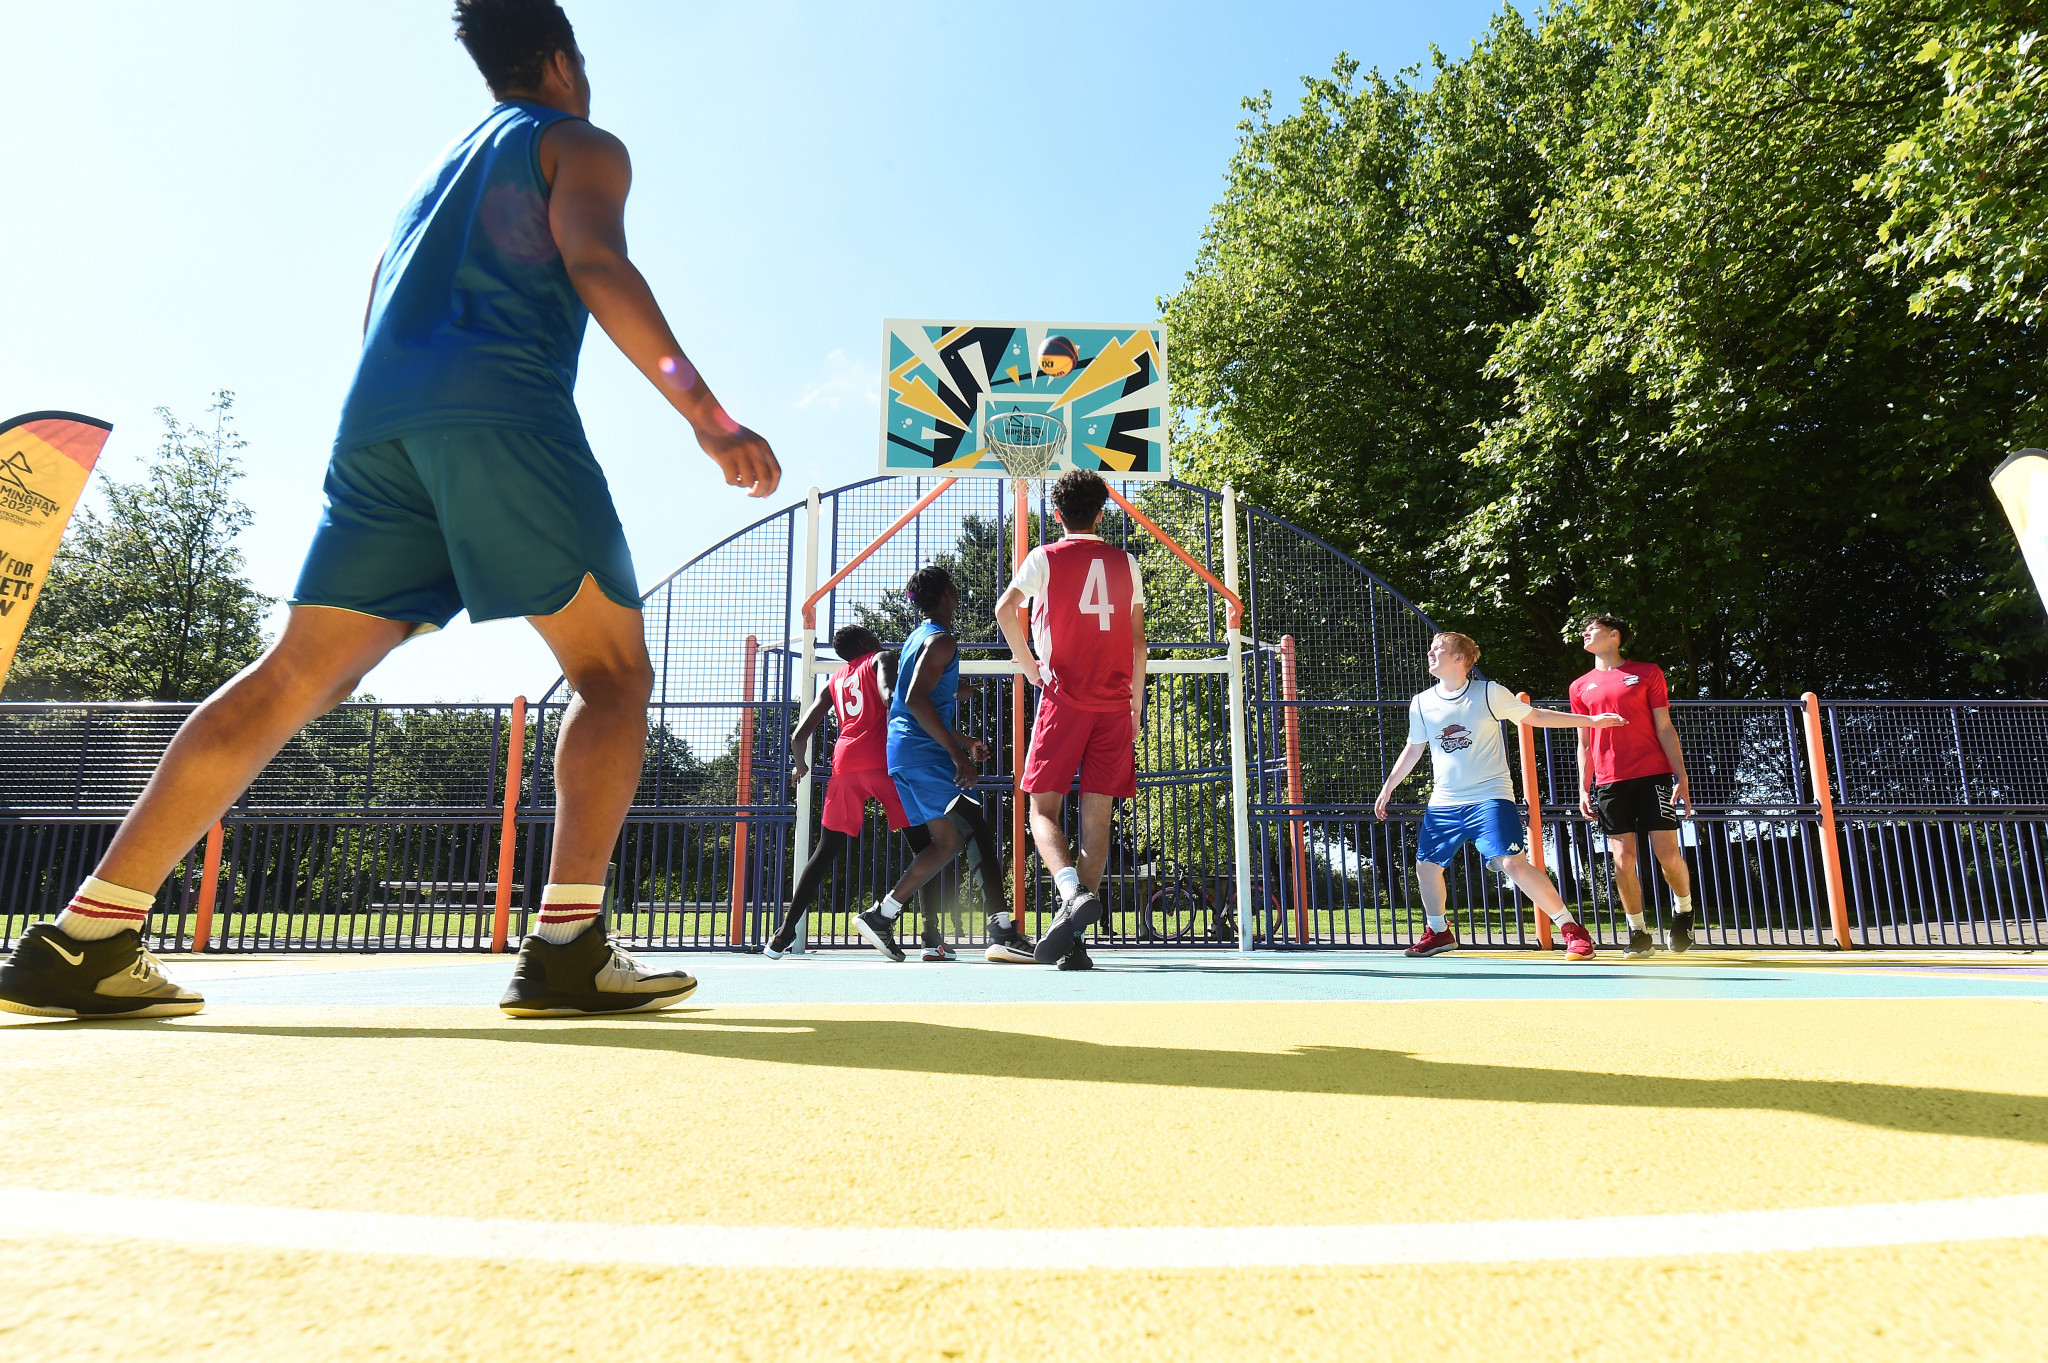 Birmingham 2022 revamped the community basketball court in Summerfield Park as the build-up to the Commonwealth Games continues ©Getty Images